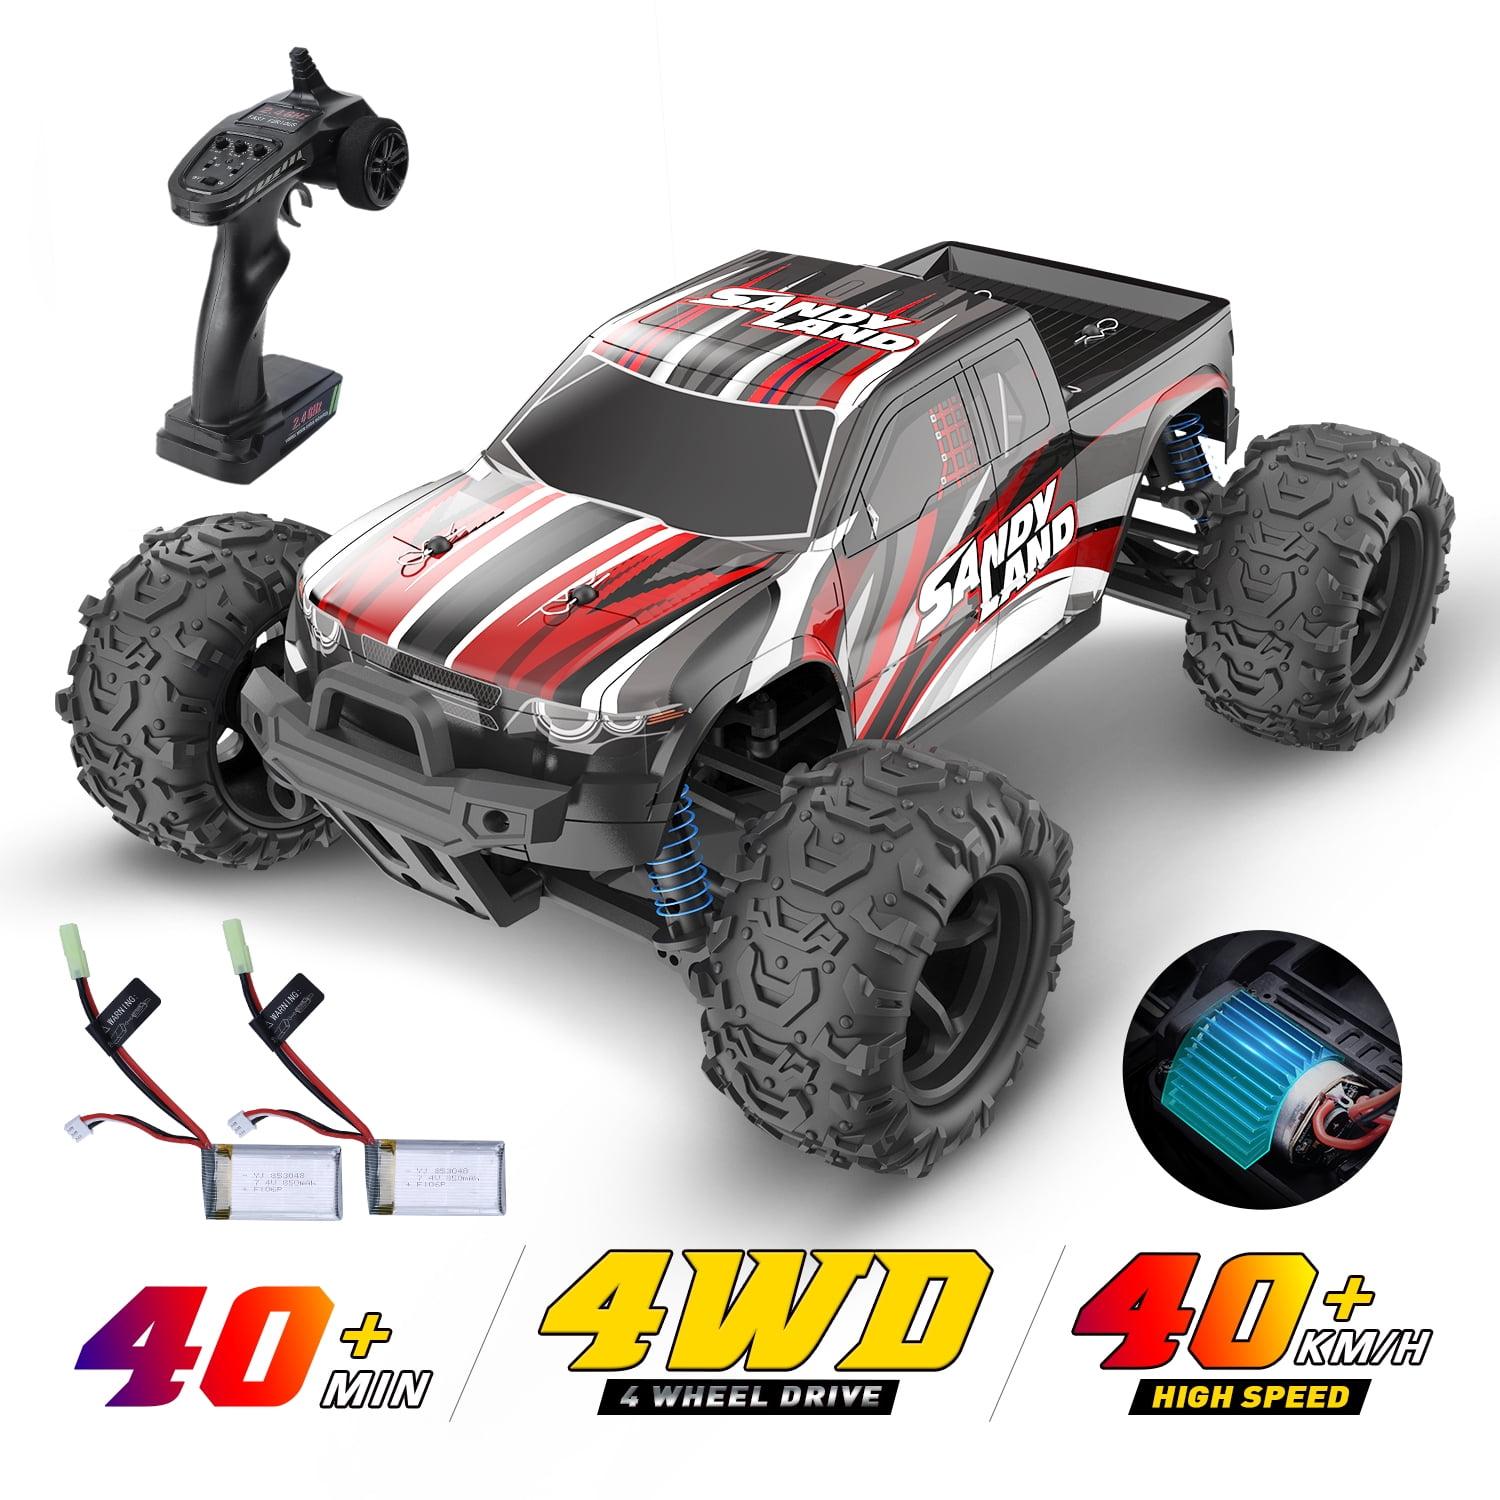 Rc Cars Off Road 4X4 Cheap: Top 4 Affordable Off-Road RC Cars: Features, Where to Buy, and More